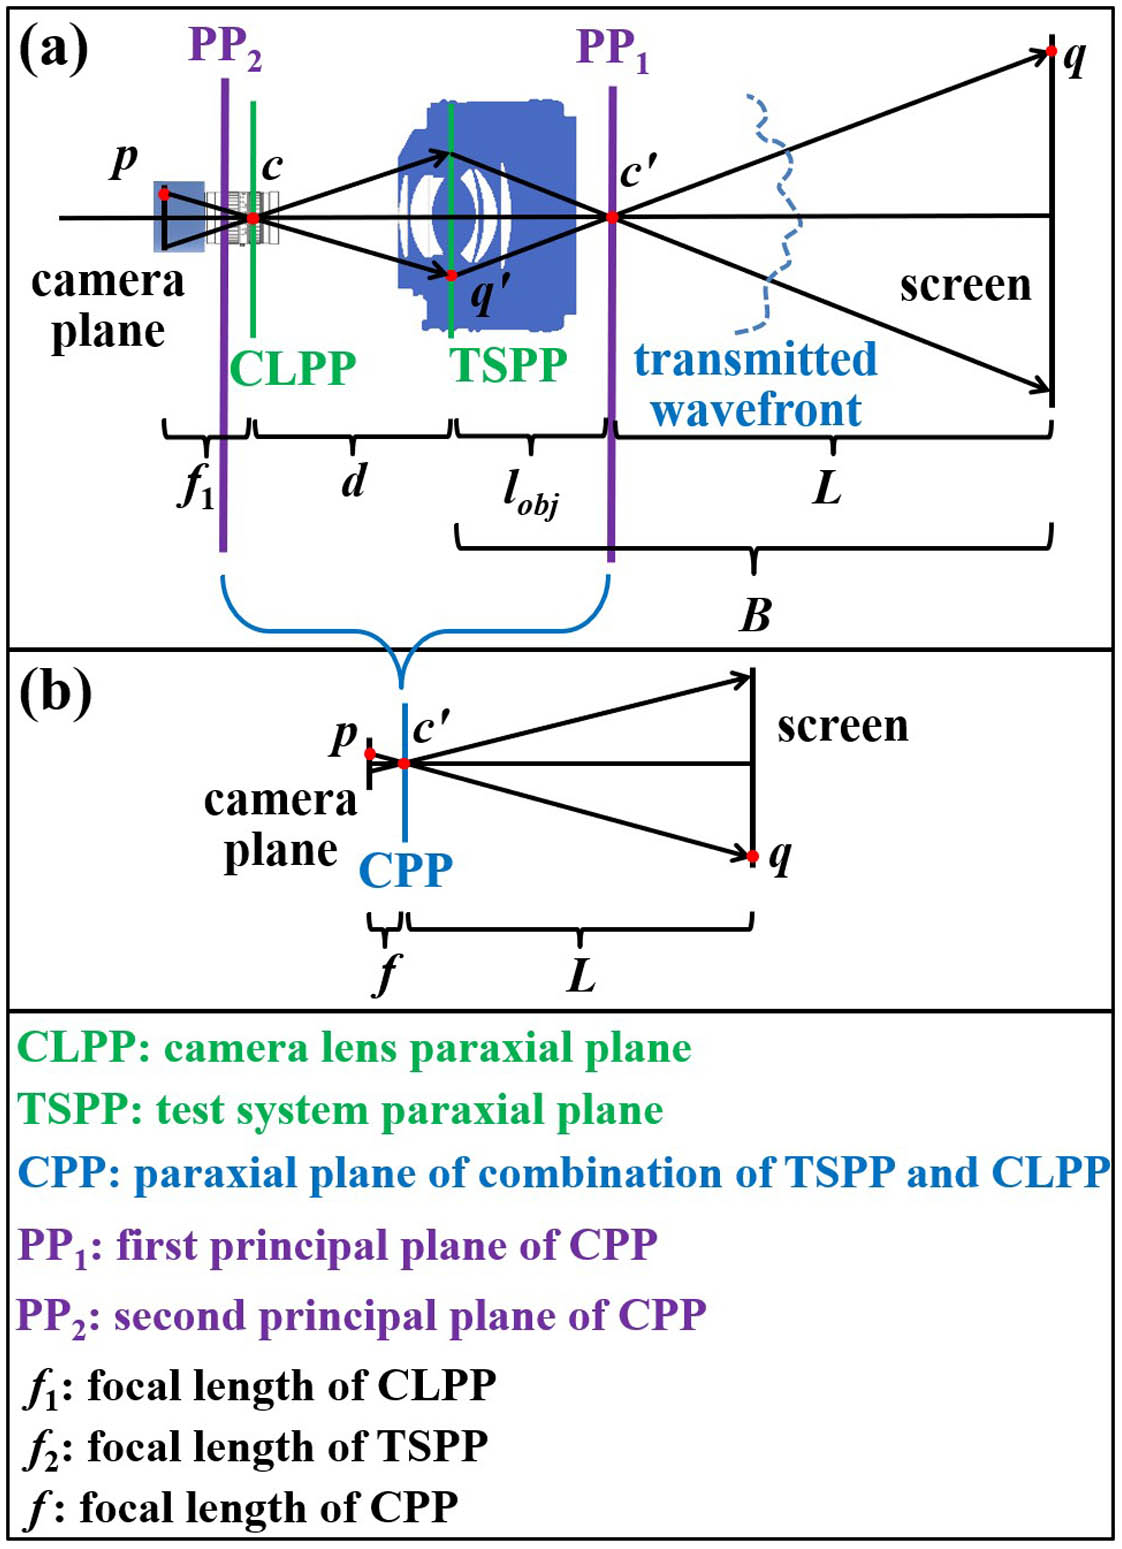 Schematic of our method. (a) Layout of the setup; (b) the part from PP1 to PP2 is squeezed into a new paraxial plane, CPP, which plays the role of the camera lens in (b).